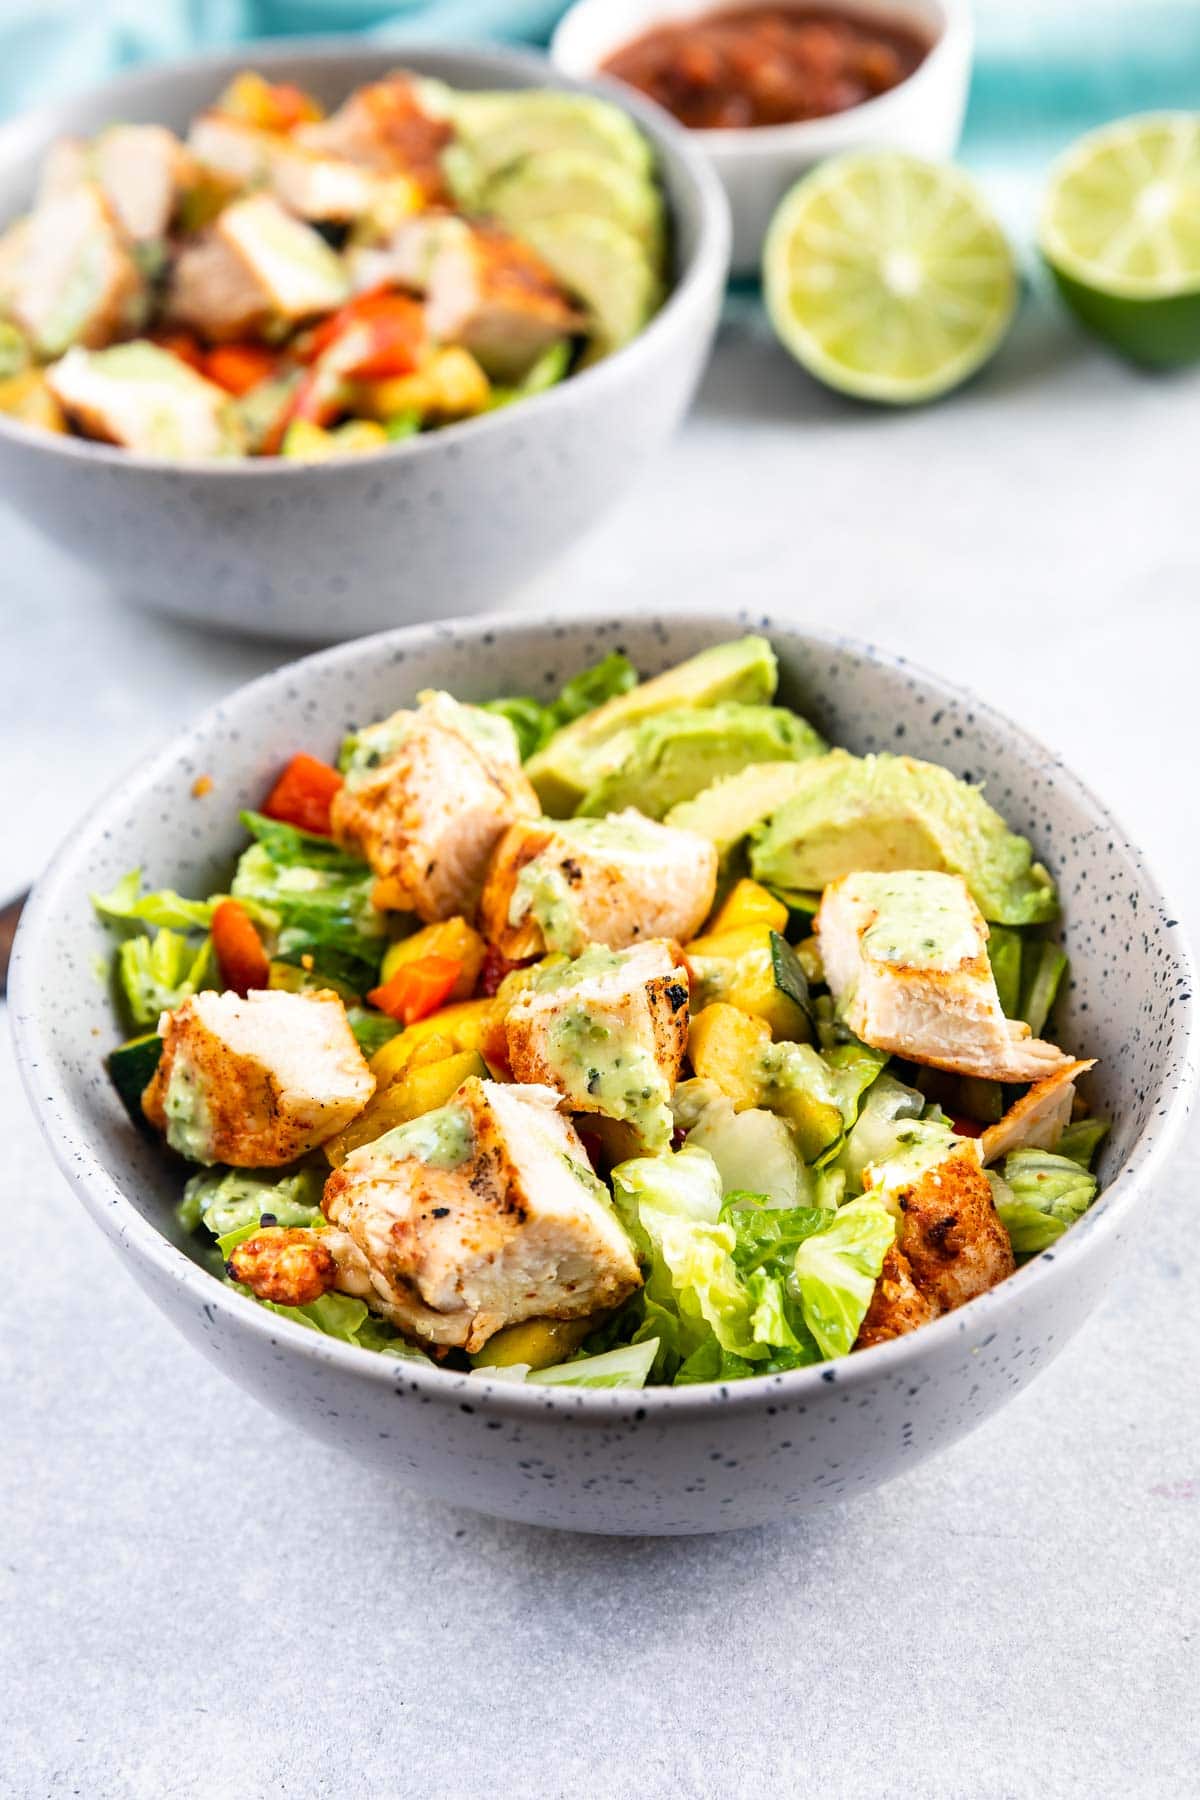 Low Carb Grilled Chicken Power Bowl - EASY GOOD IDEAS